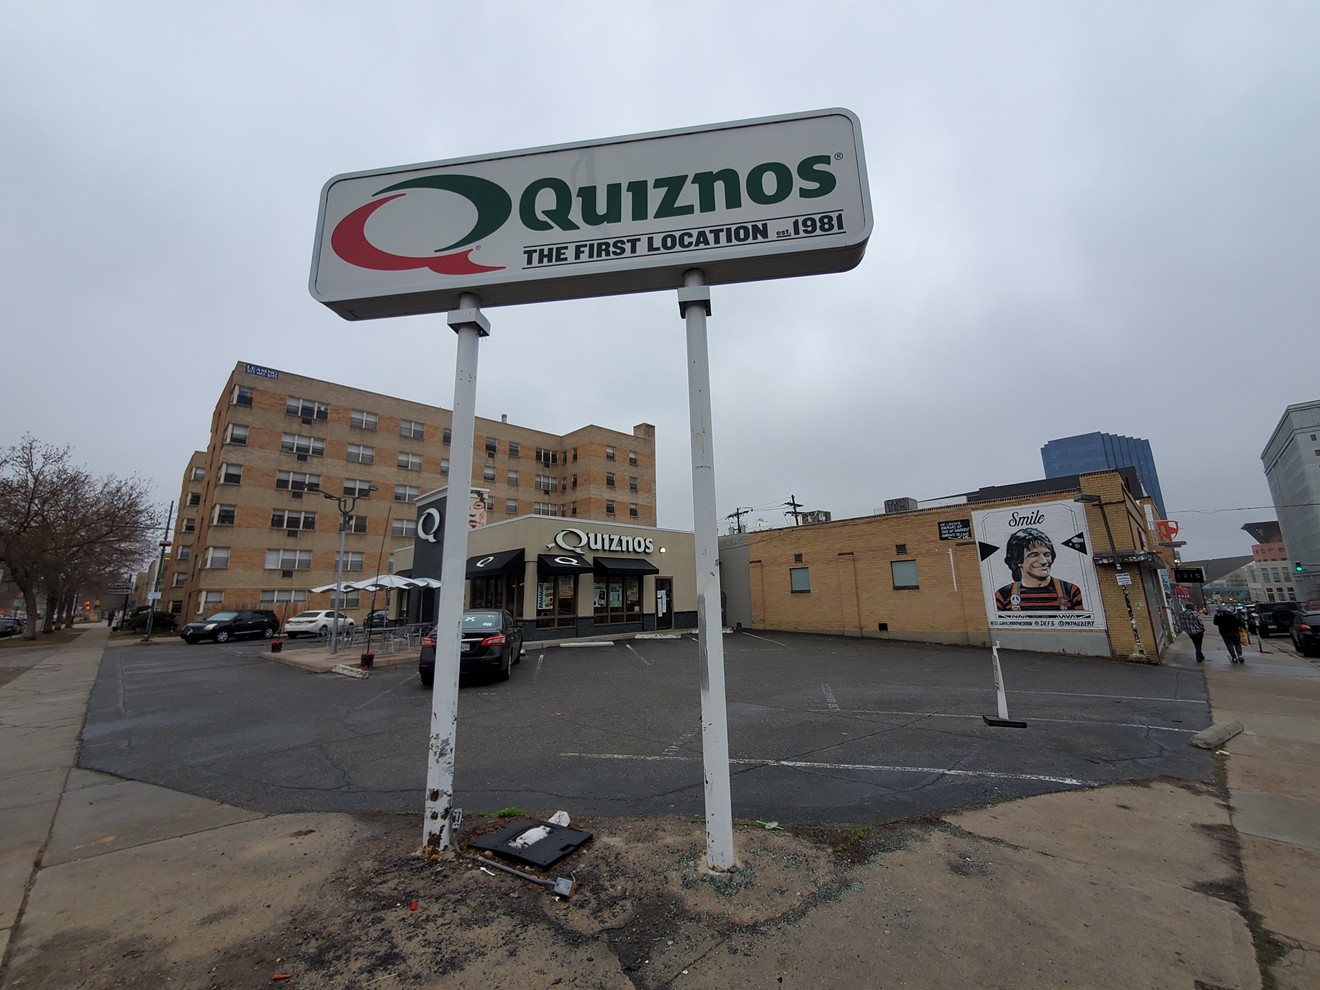 The first Quiznos opened in 1981.